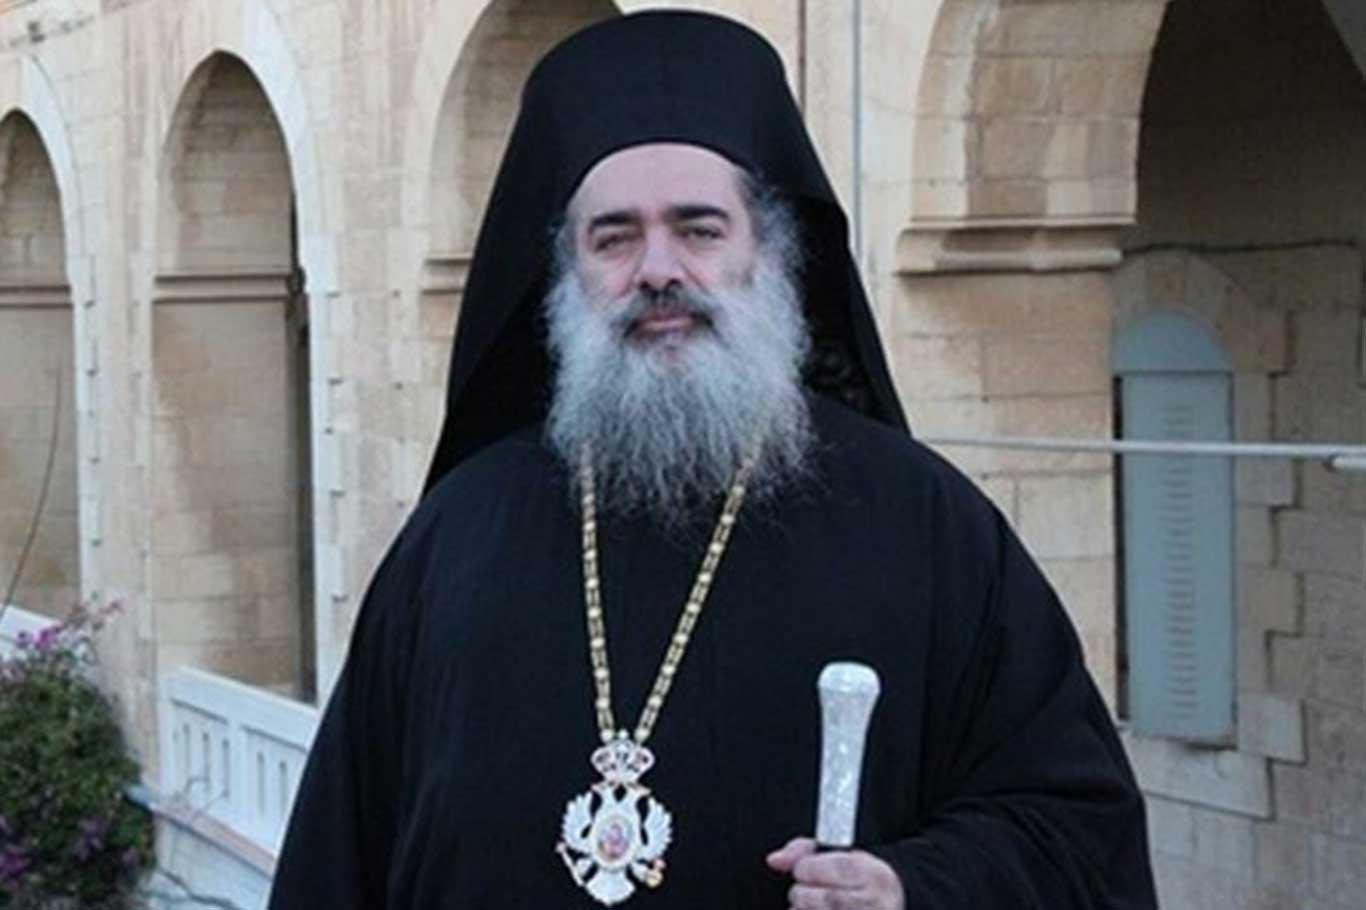 Father Hanna calls for watching out for zionists’ settlement practices